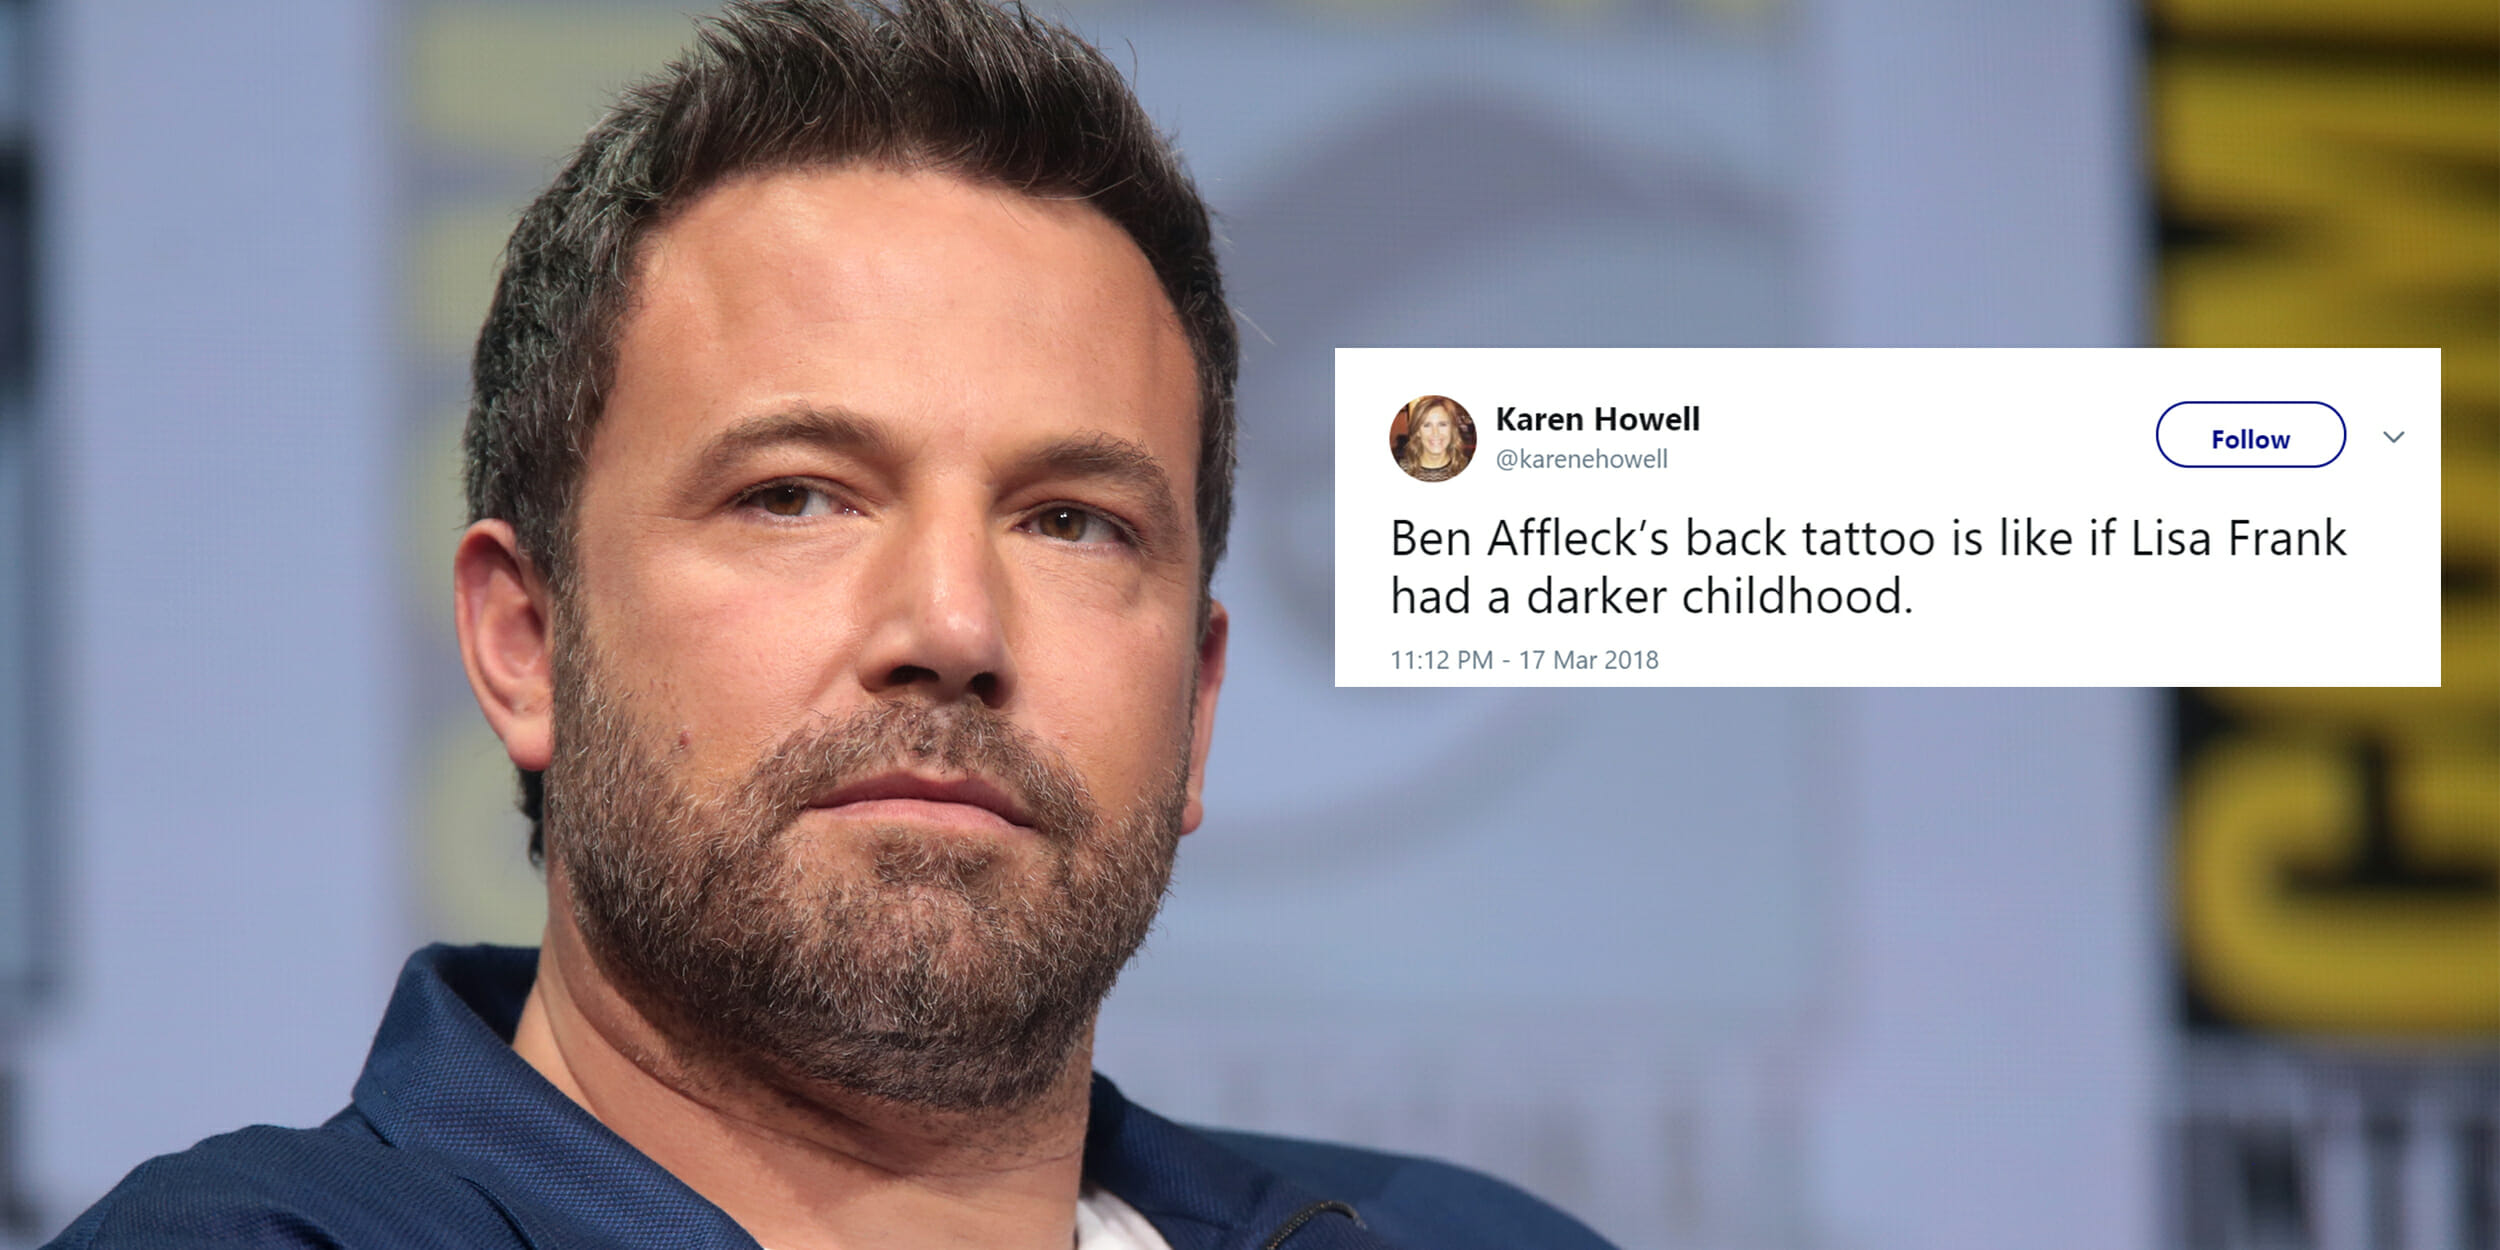 Ben Affleck Loves His Giant Phoenix Back Tattoo Thank You Very Much   Vanity Fair